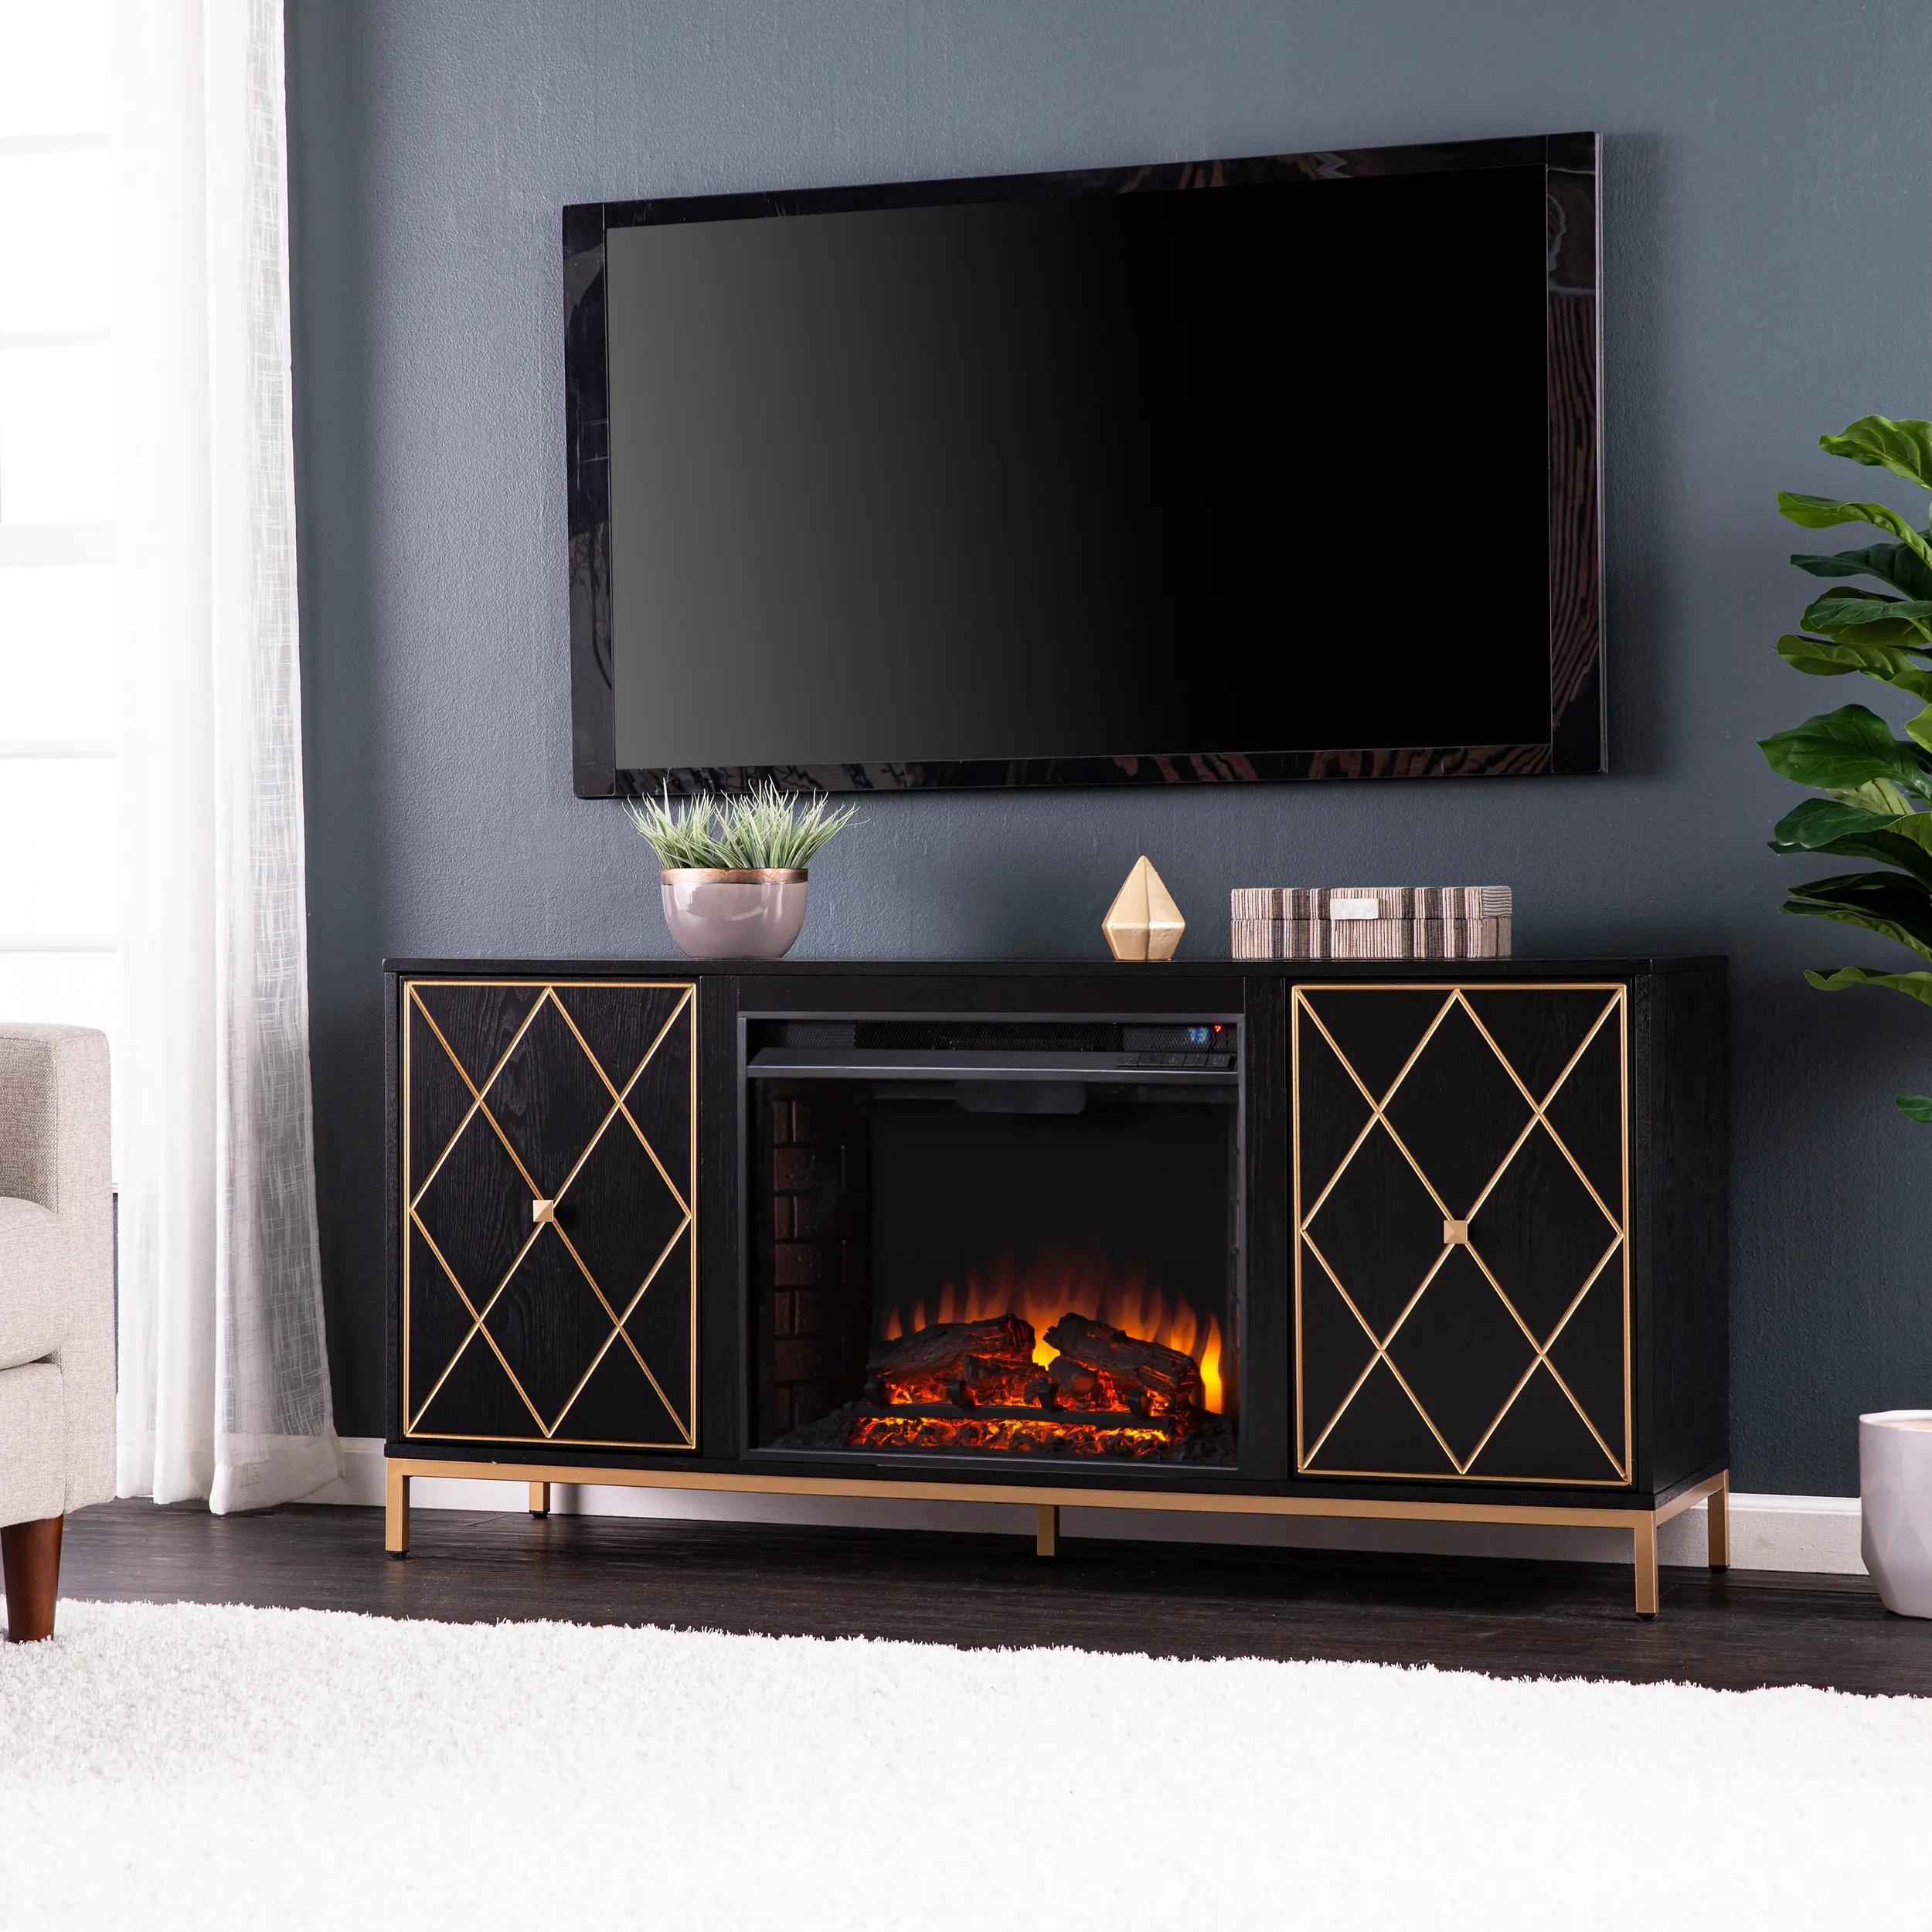 Marradi Black & Gold Electric Fireplace TV Stand